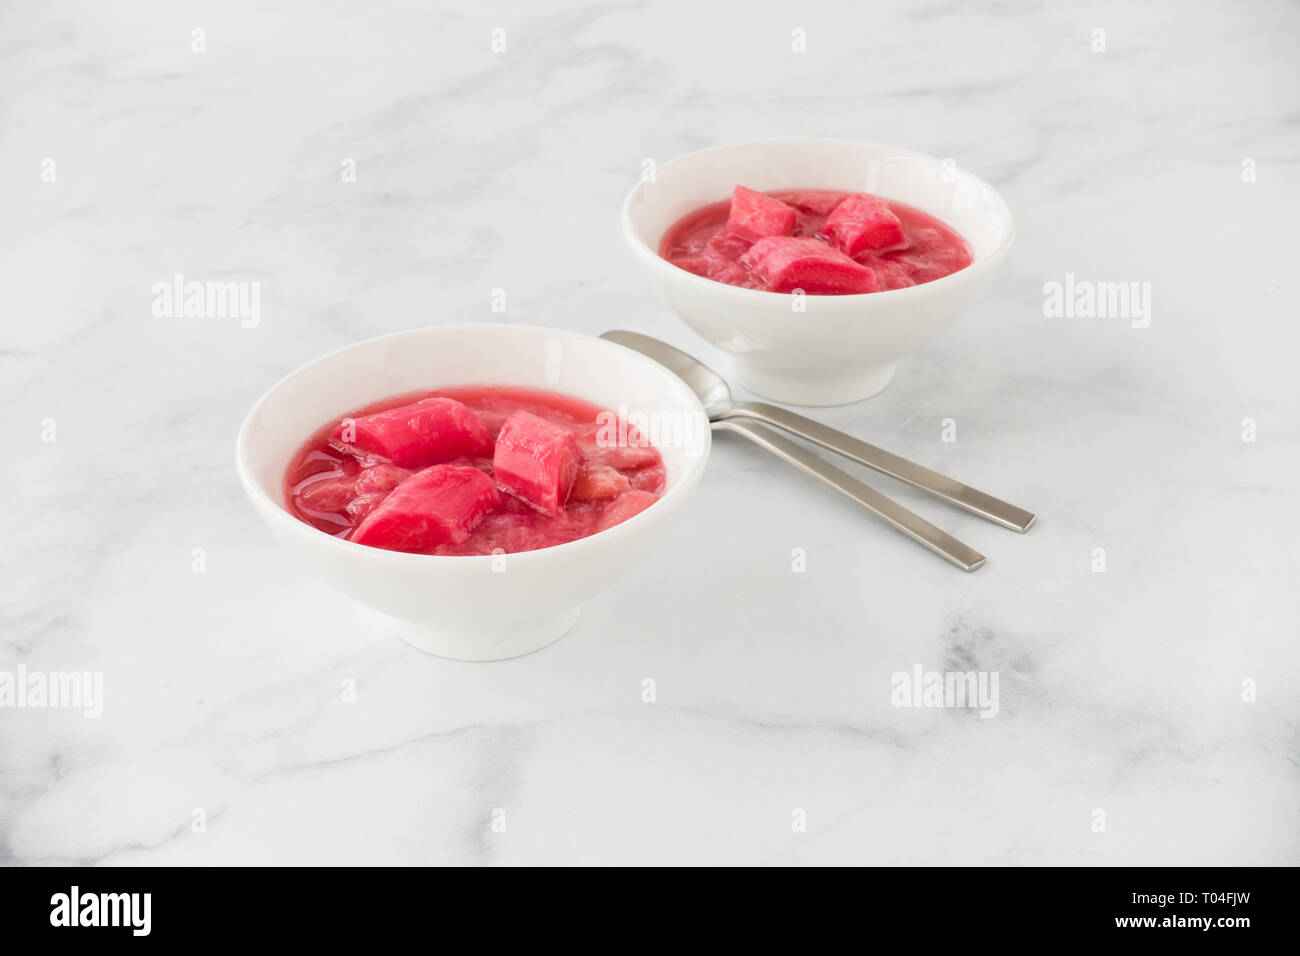 Homemade rhubarb compote, dessert, made from pink forced rhubarb, in two white porcelain bowls on white marble background. Stock Photo